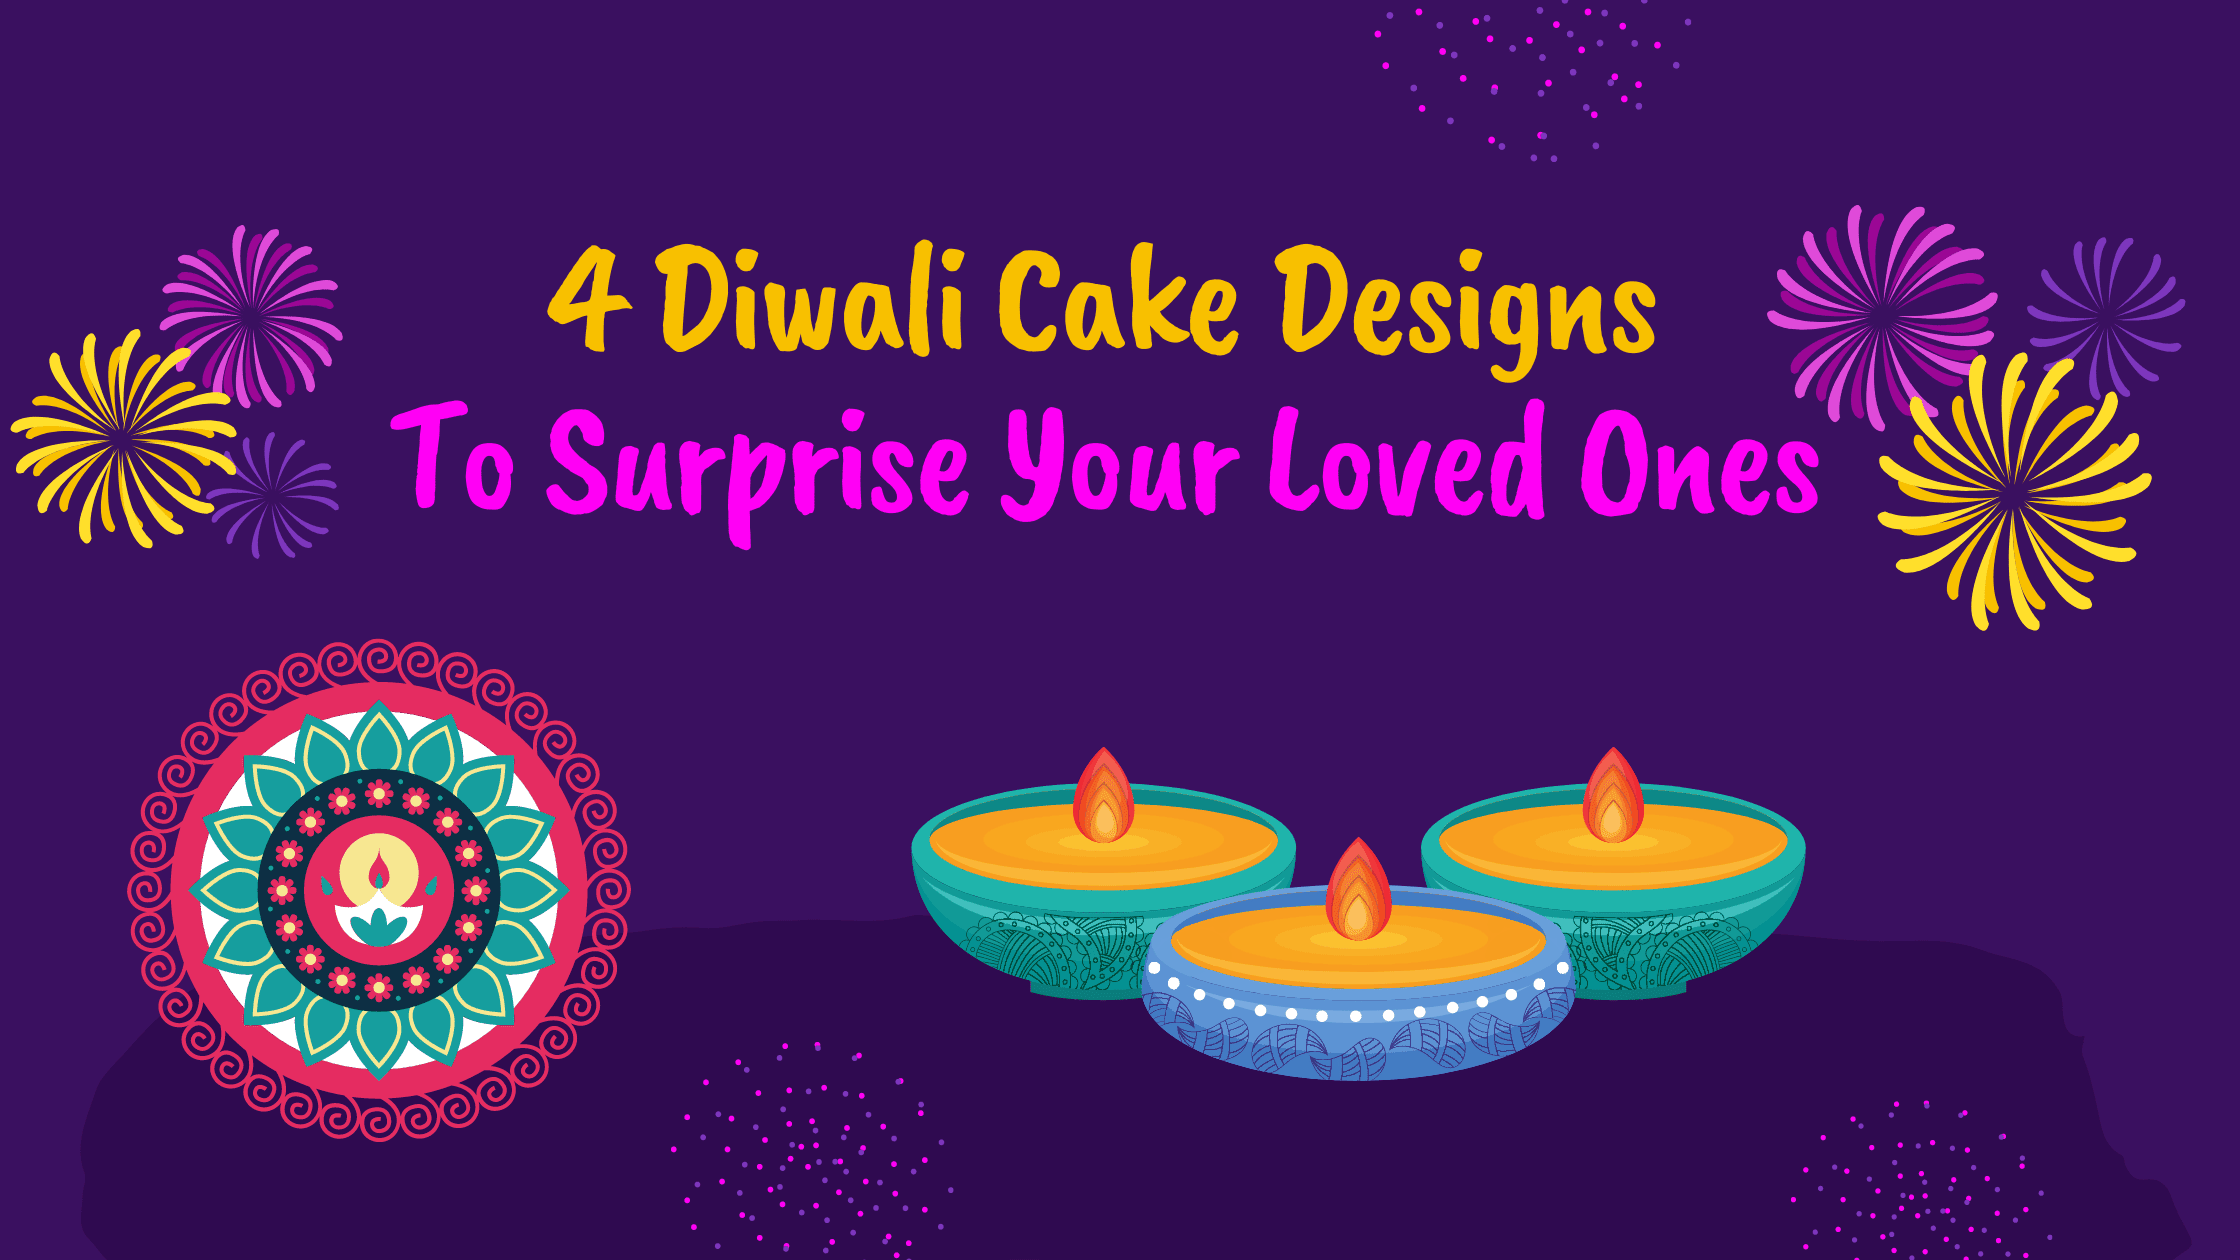 4 Diwali Cake Designs To Aamze Your Loved Ones